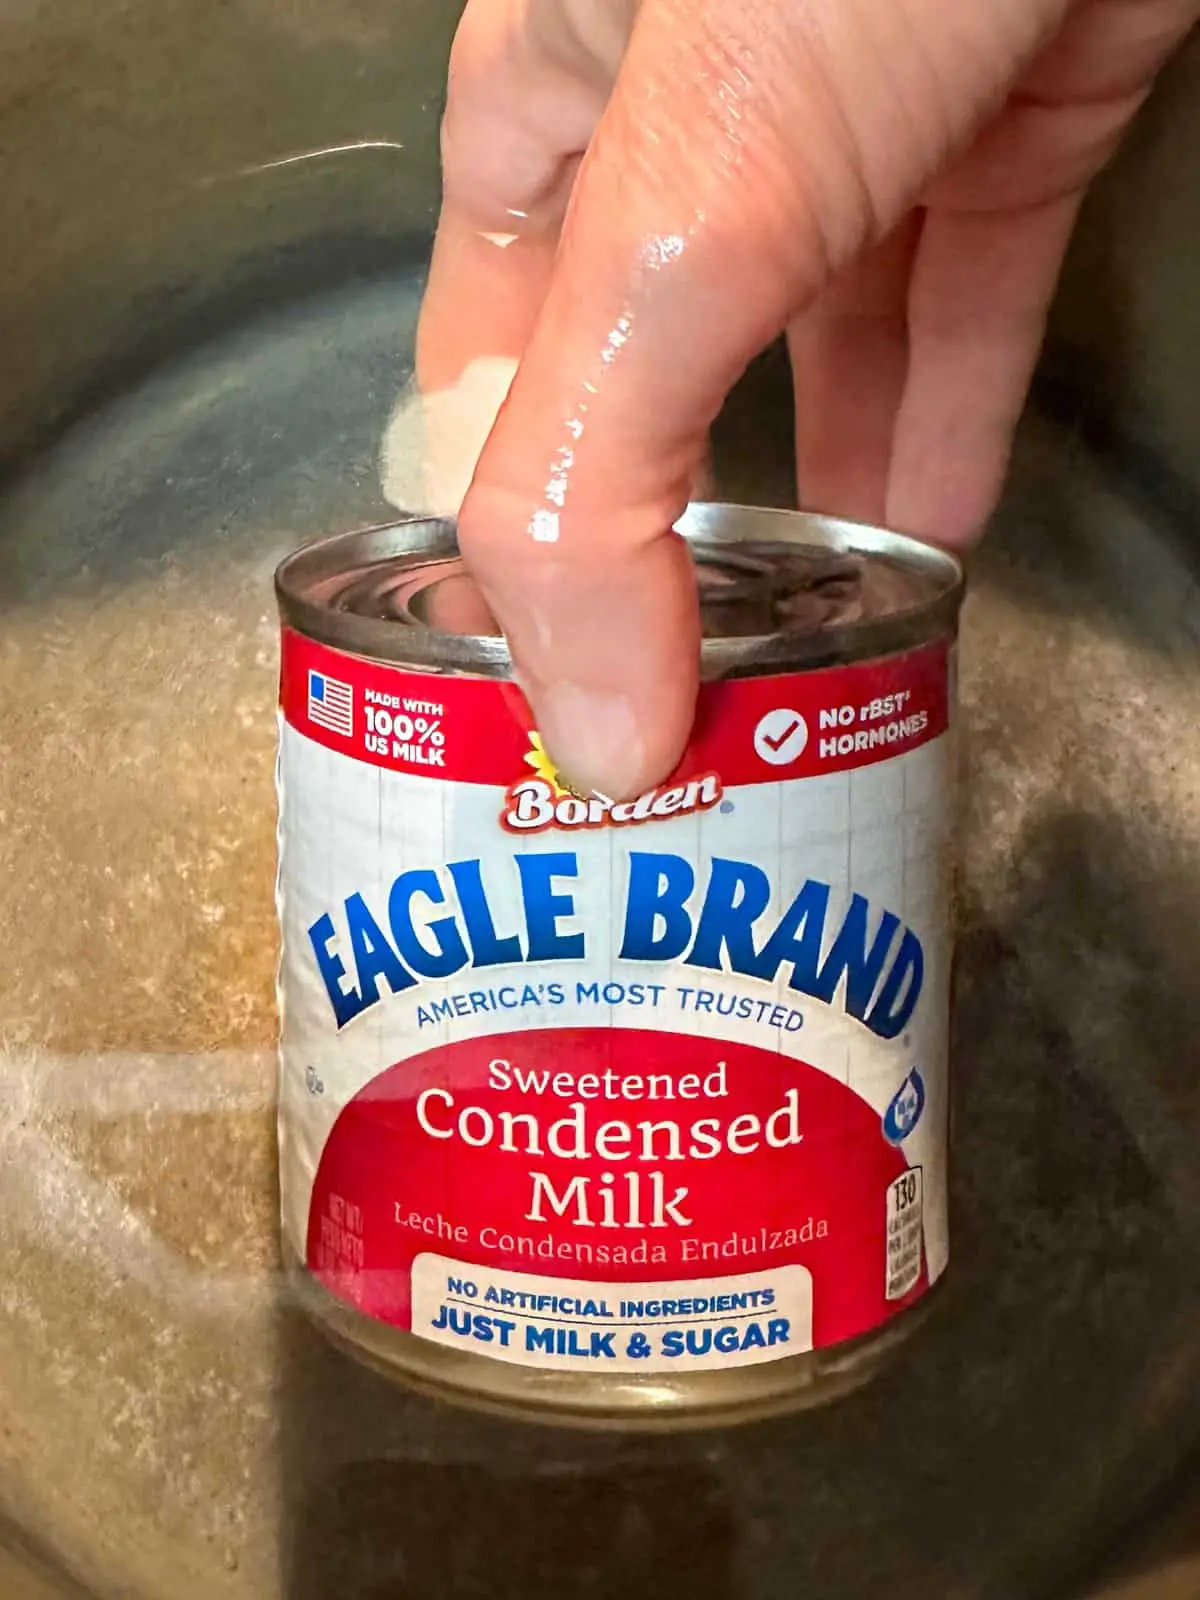 A large stockpot containing water. There is a hand holding a can of Eagle Brand Sweetened Condensed Milk about to put it under the water.